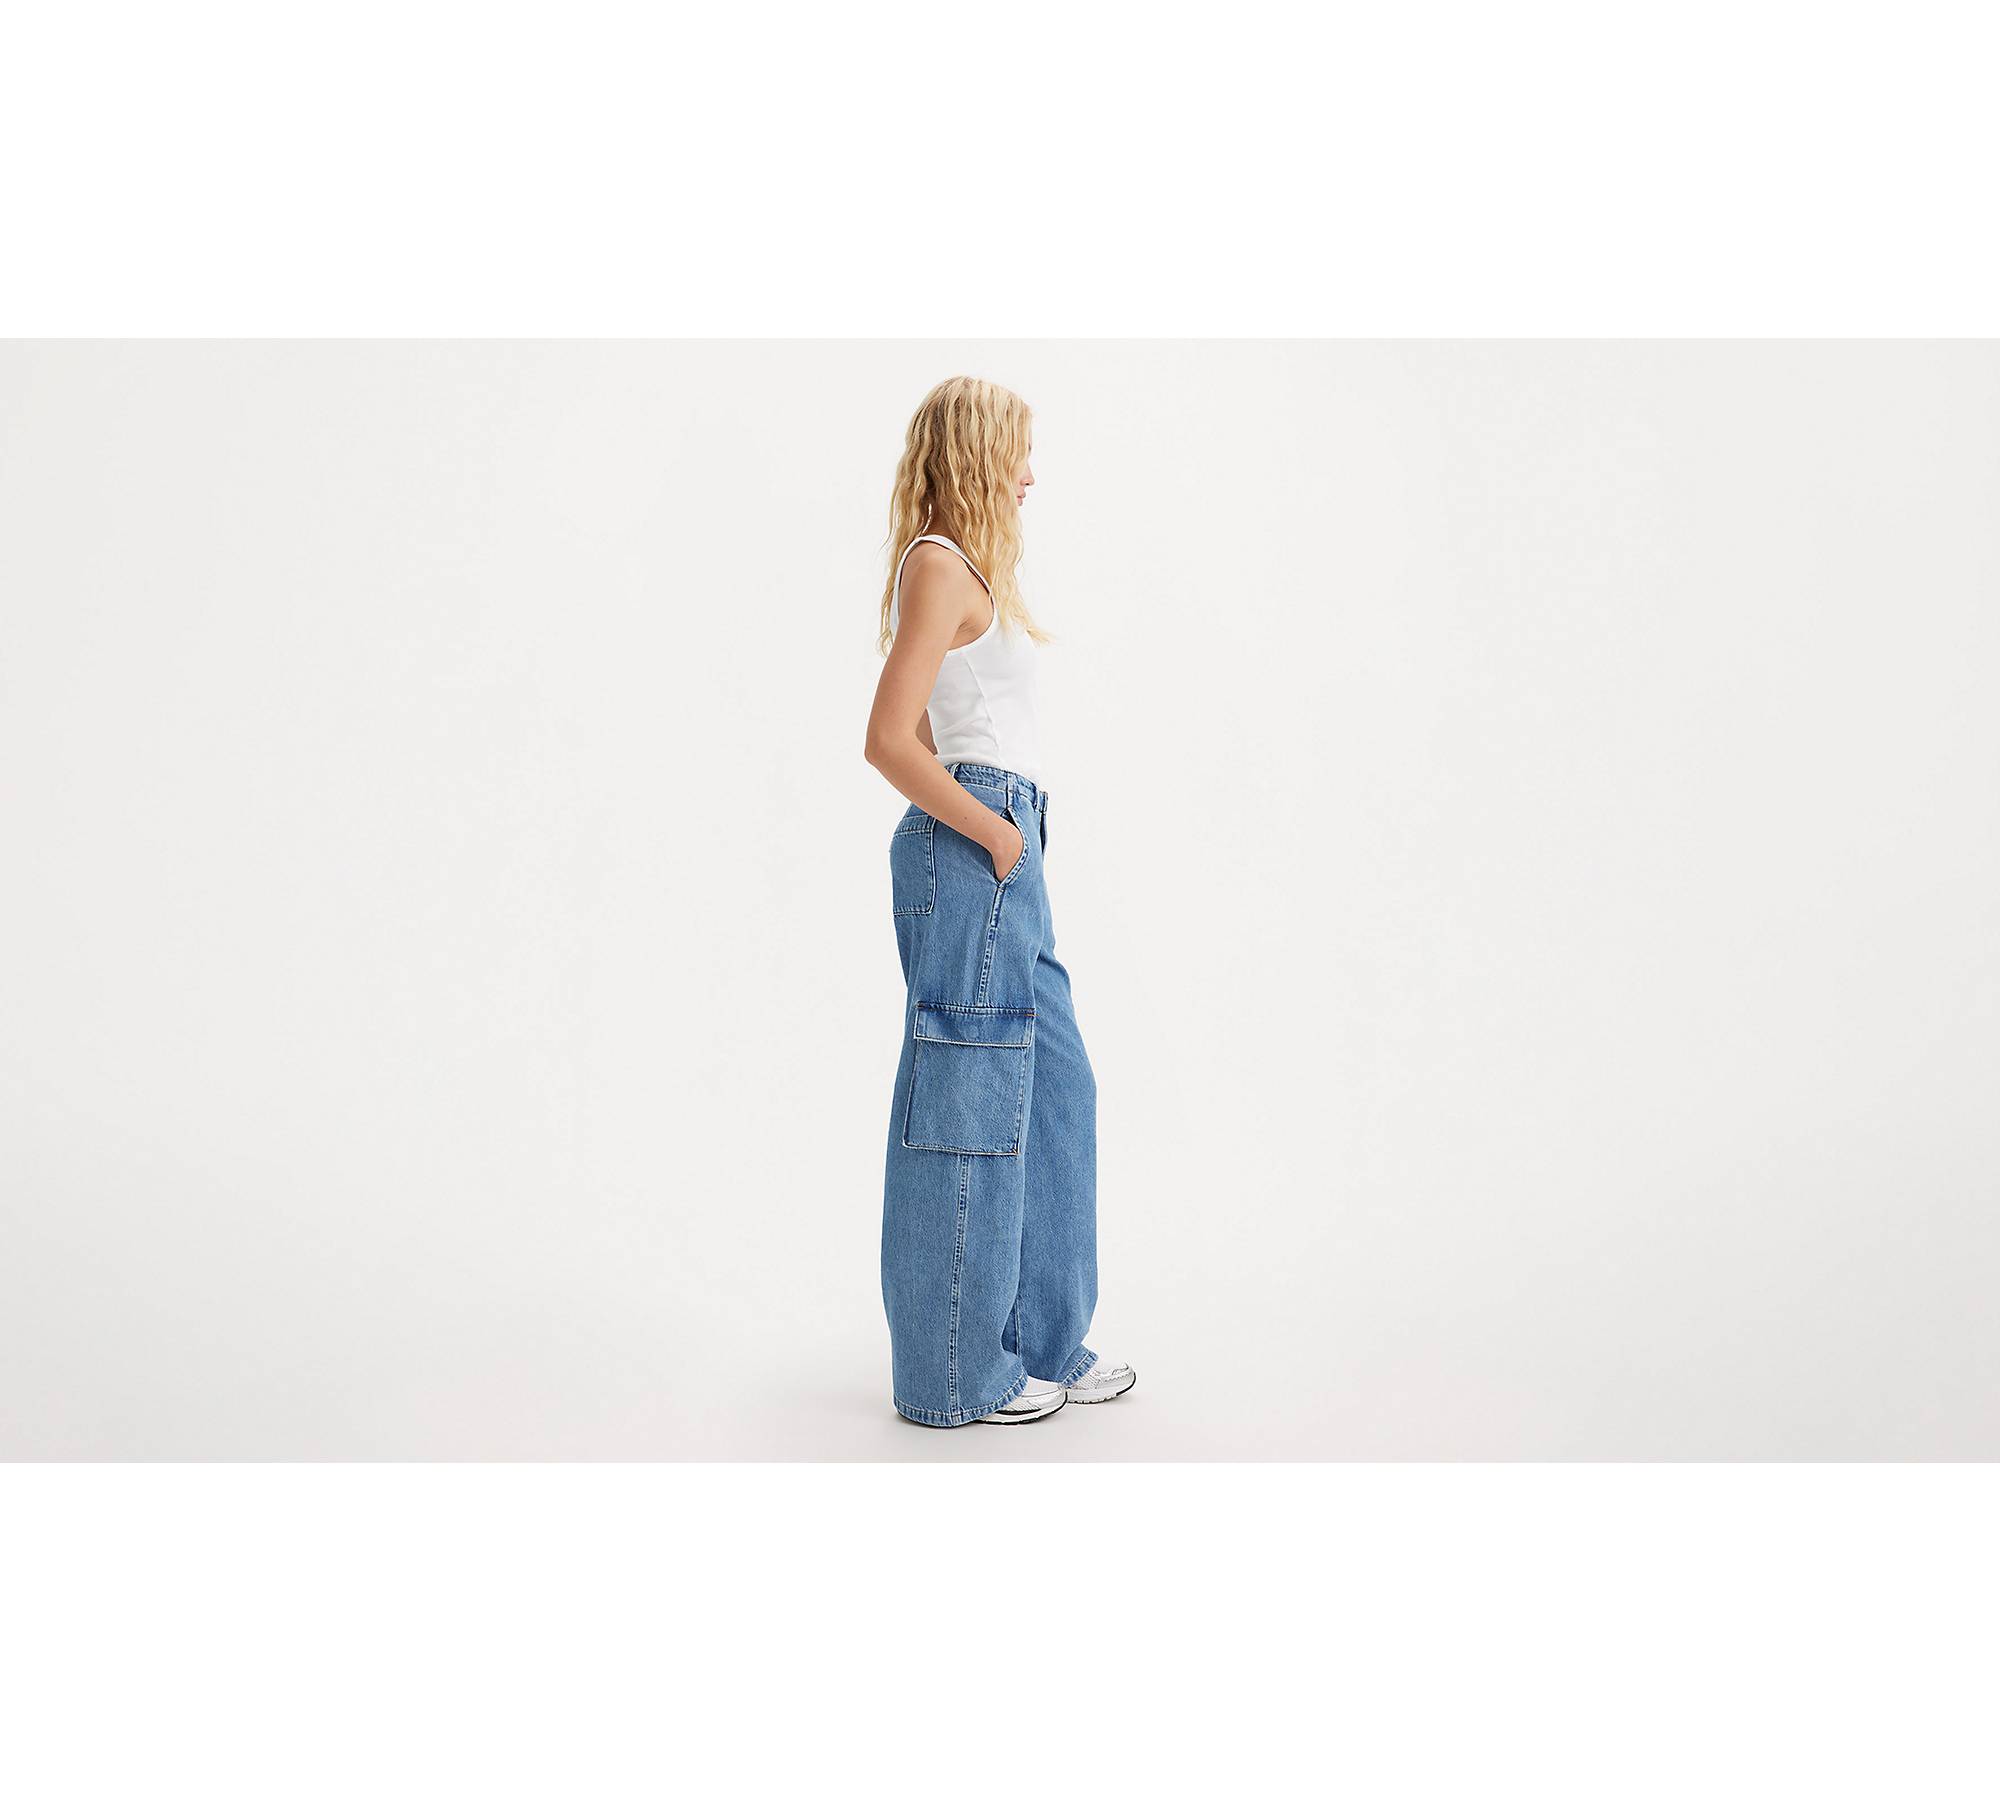 Low Rise Medium Wash Baggy Straight Cargo Jeans